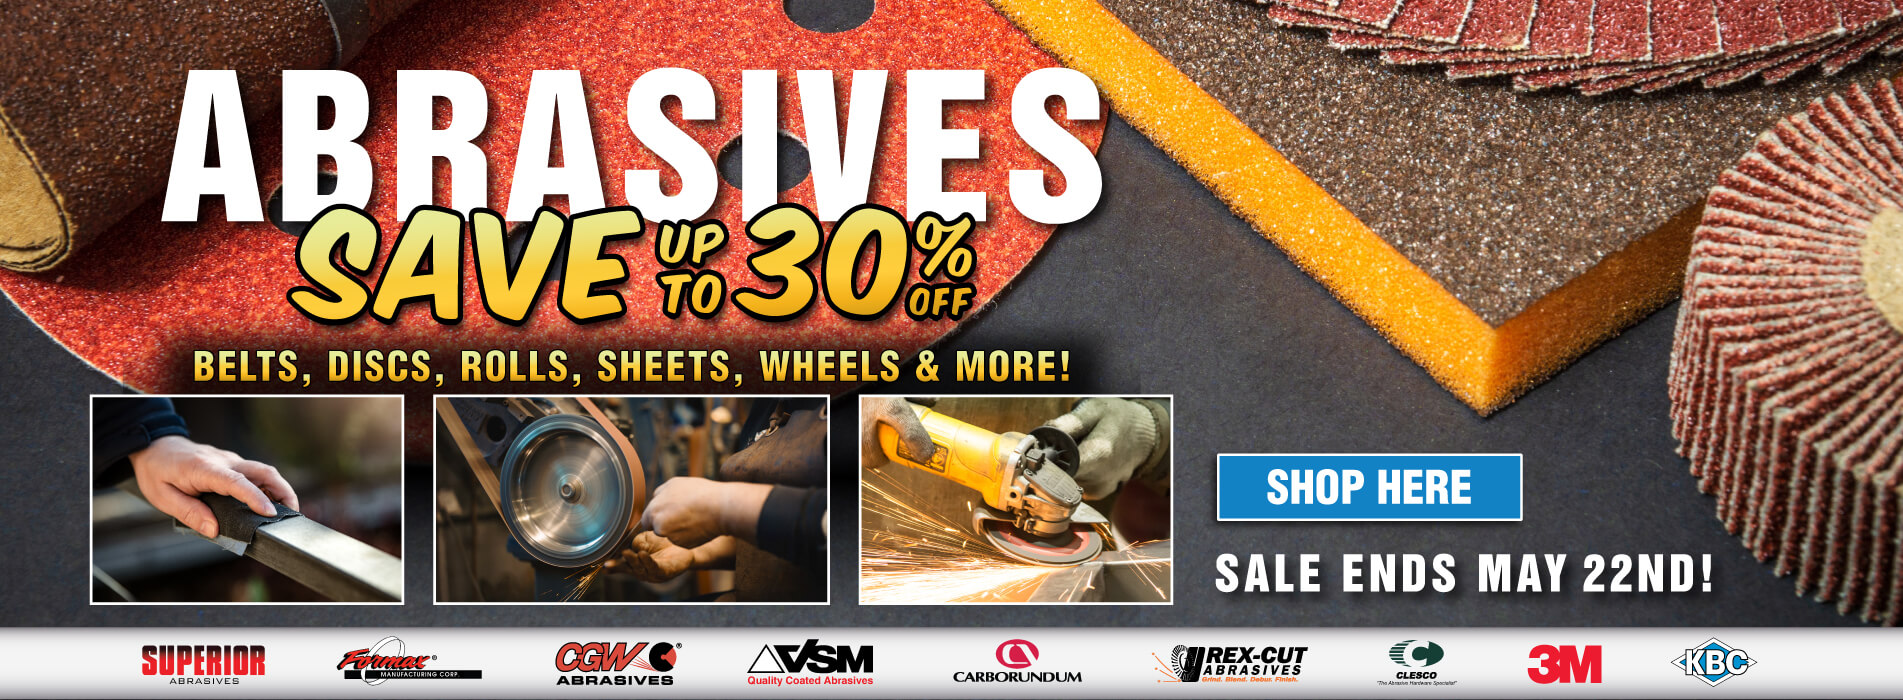 Save Up To 30% Off Abrasives! Hurry, One Week Only! Save on Belts, Discs, Rolls, Sheets, Wheels, & more!